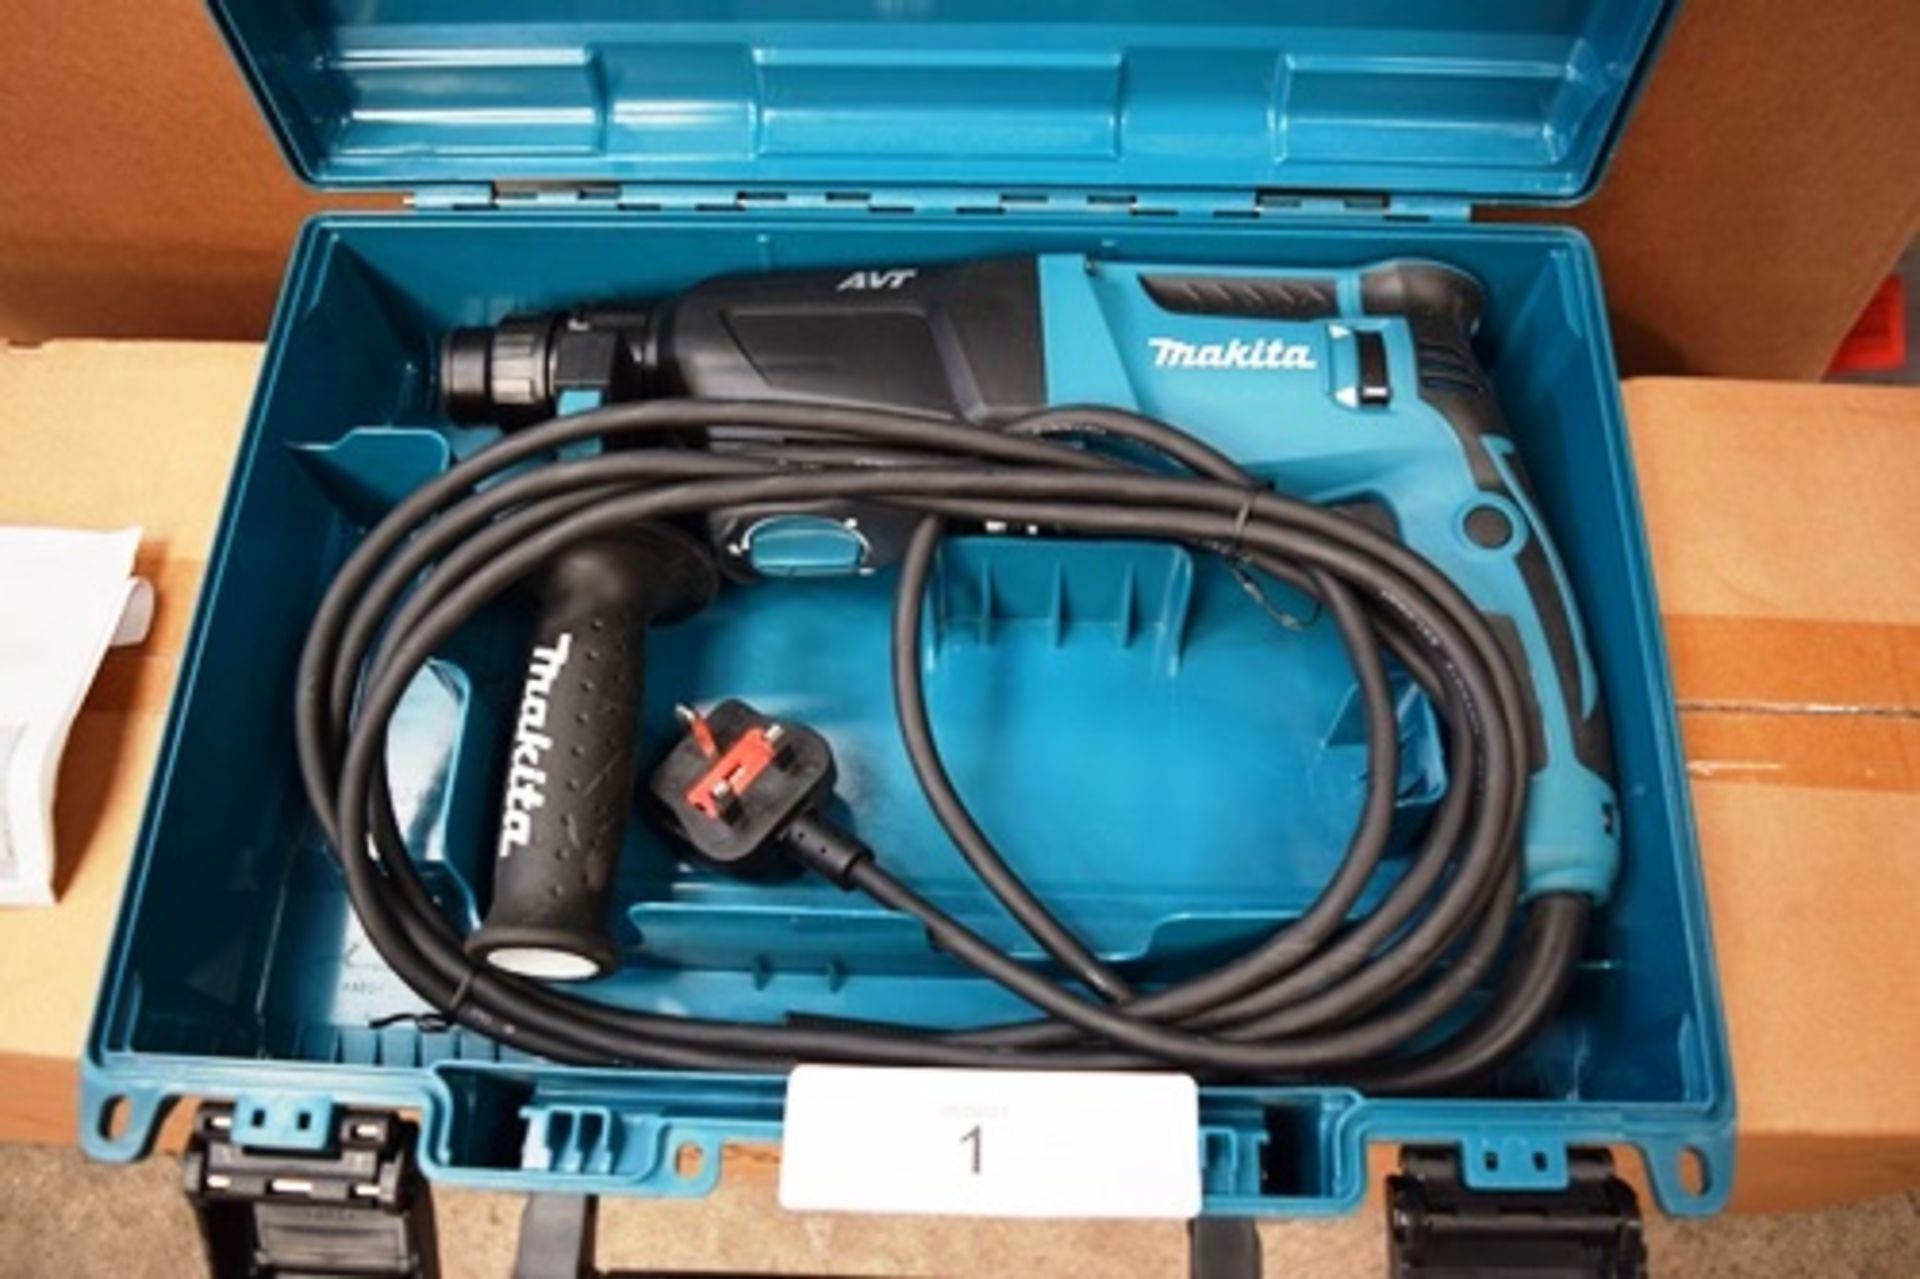 1 x Makita AVT rotary drill, model HR2611F, 240V, with instruction manual and case - Untested (